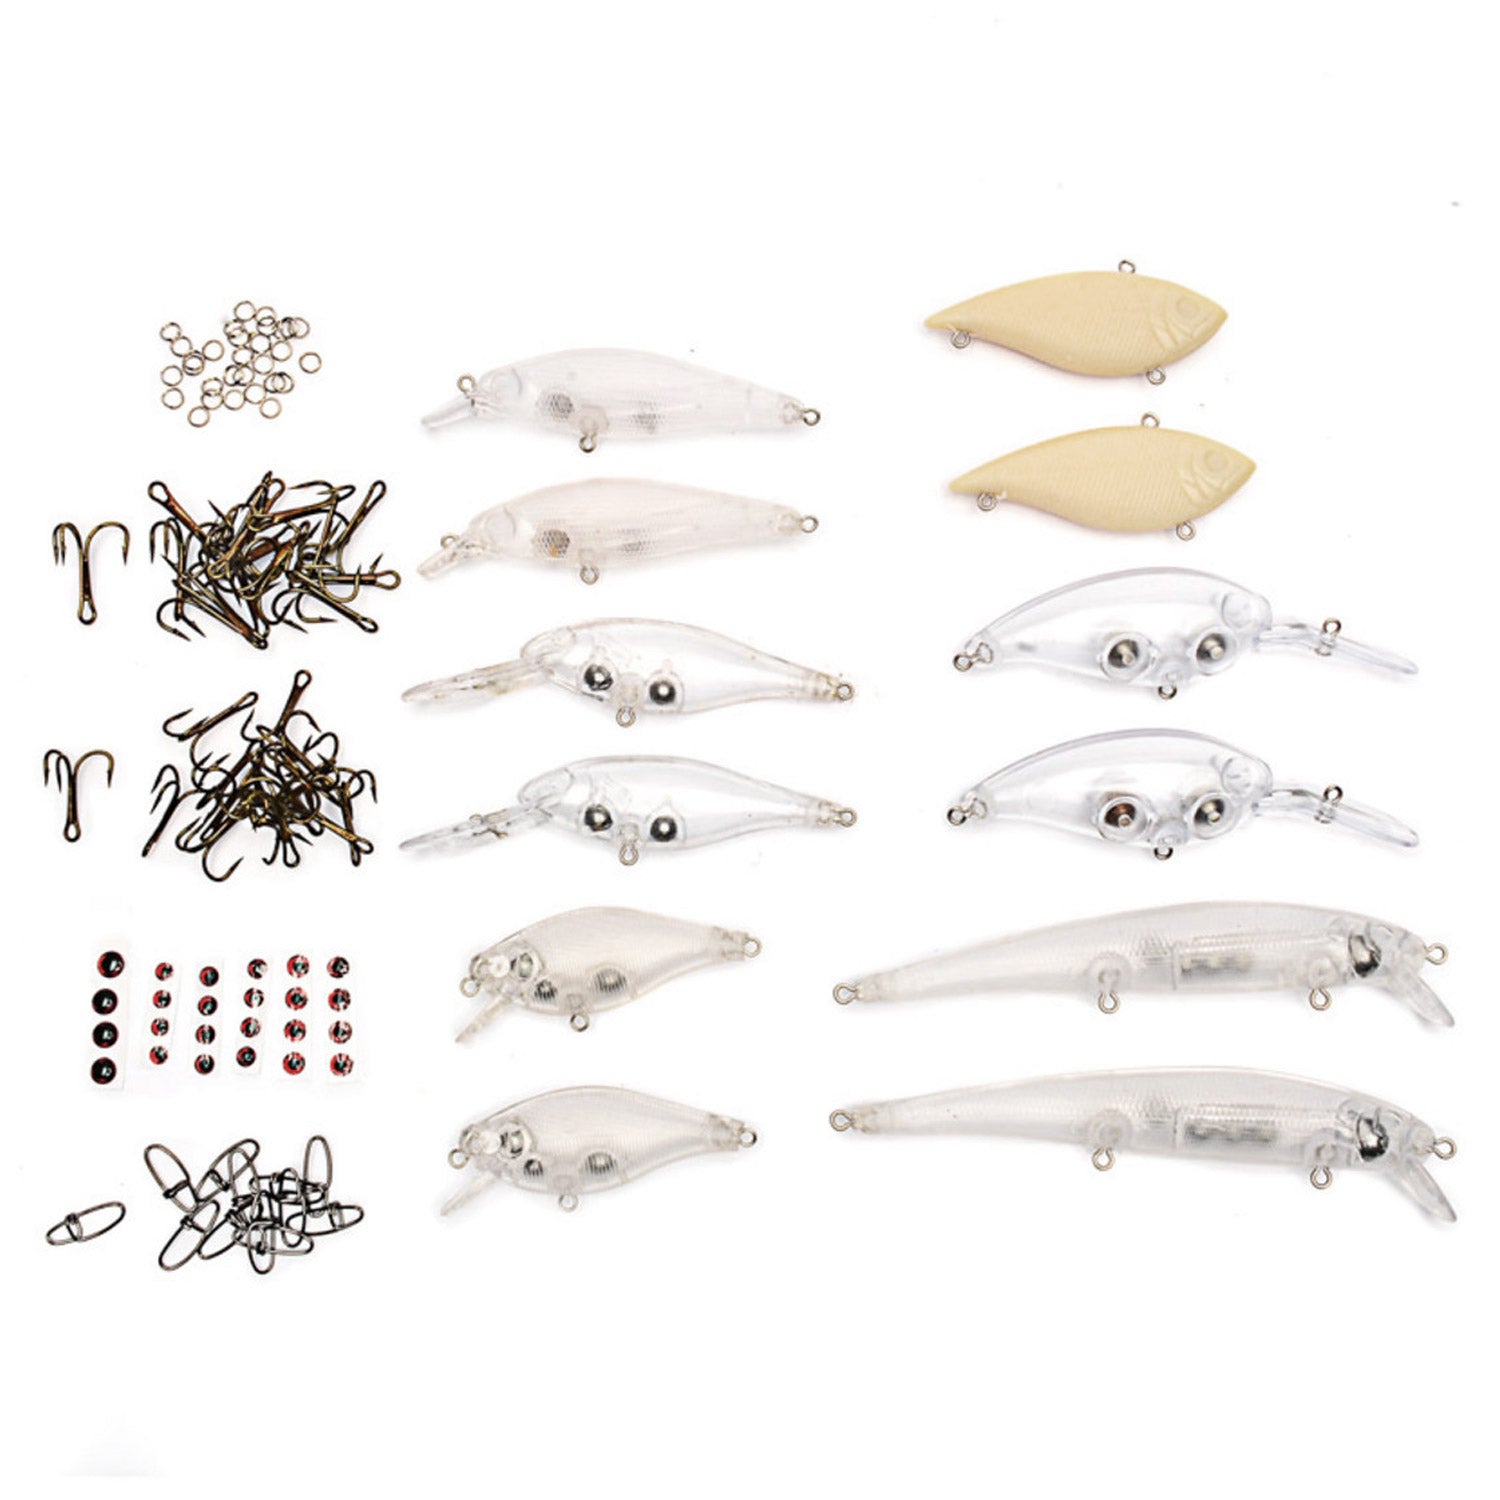 Fishing Lure Building Kits and Supplies - Free Shipping